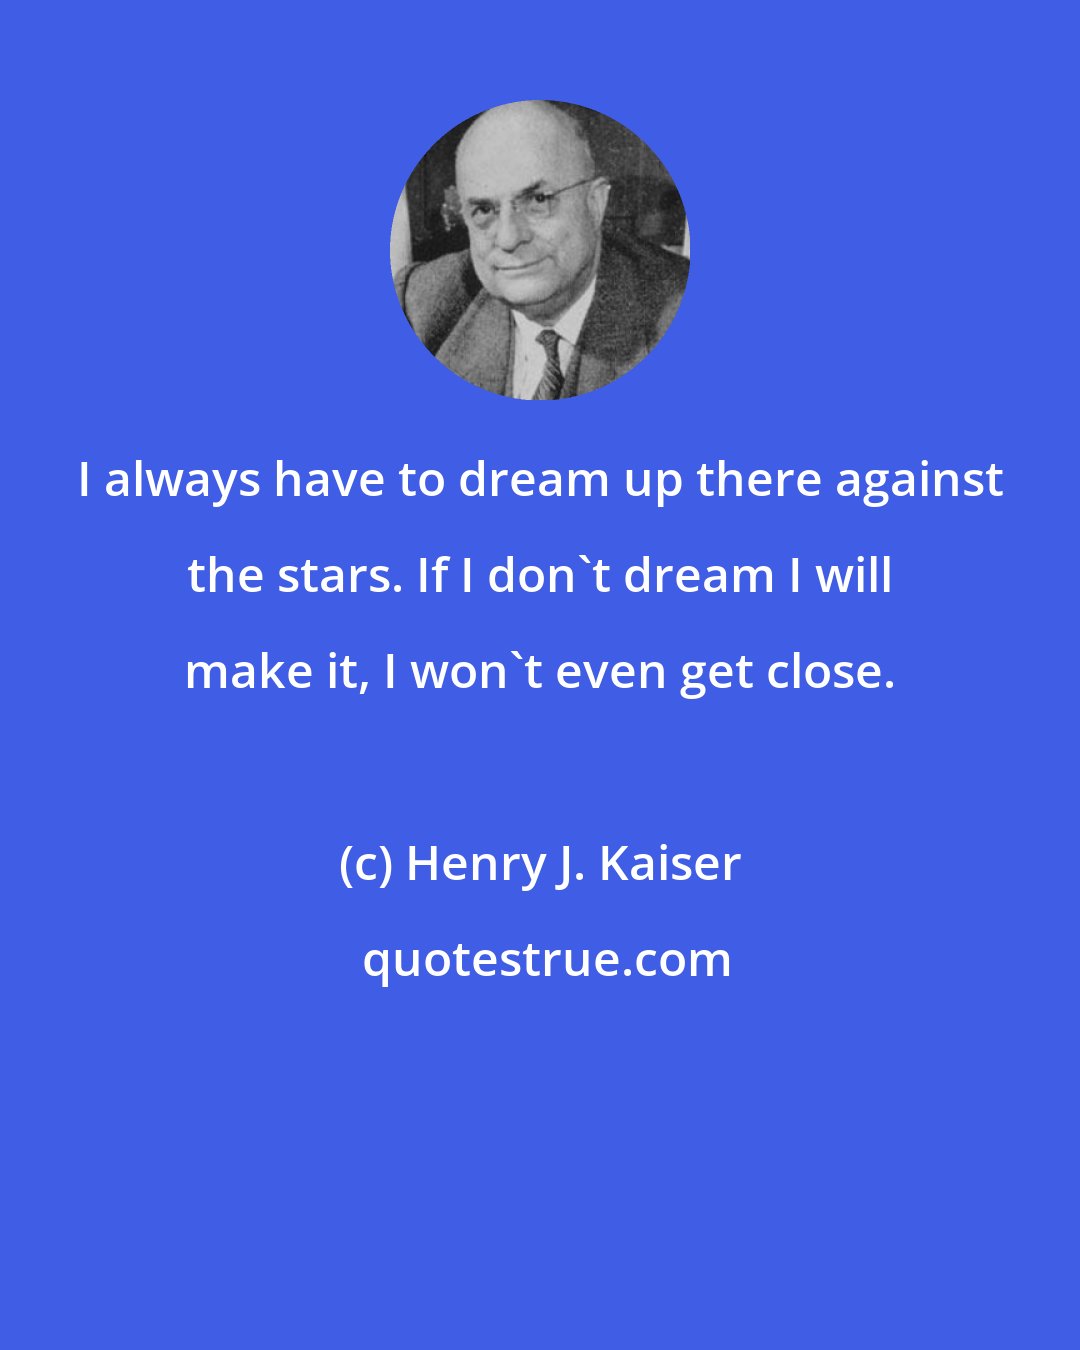 Henry J. Kaiser: I always have to dream up there against the stars. If I don't dream I will make it, I won't even get close.